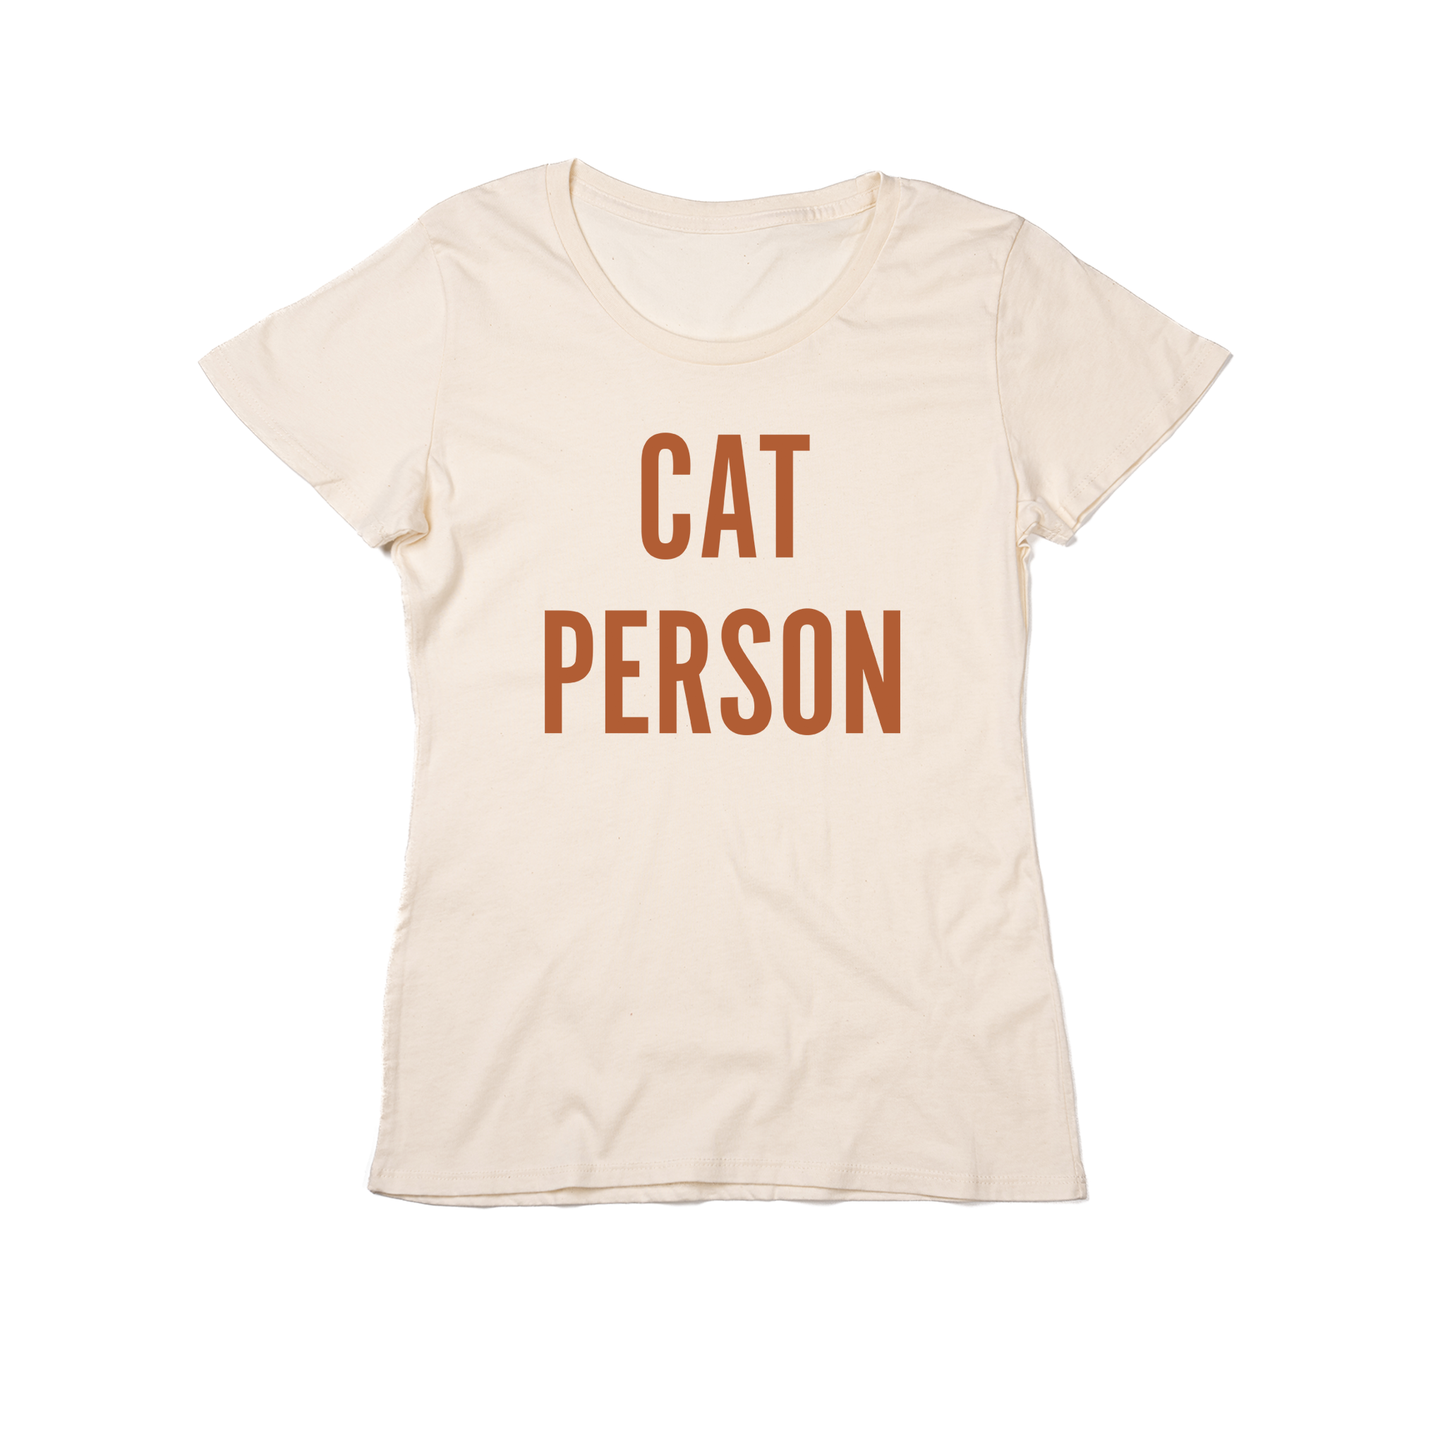 Cat Person (Rust) - Women's Fitted Tee (Natural)